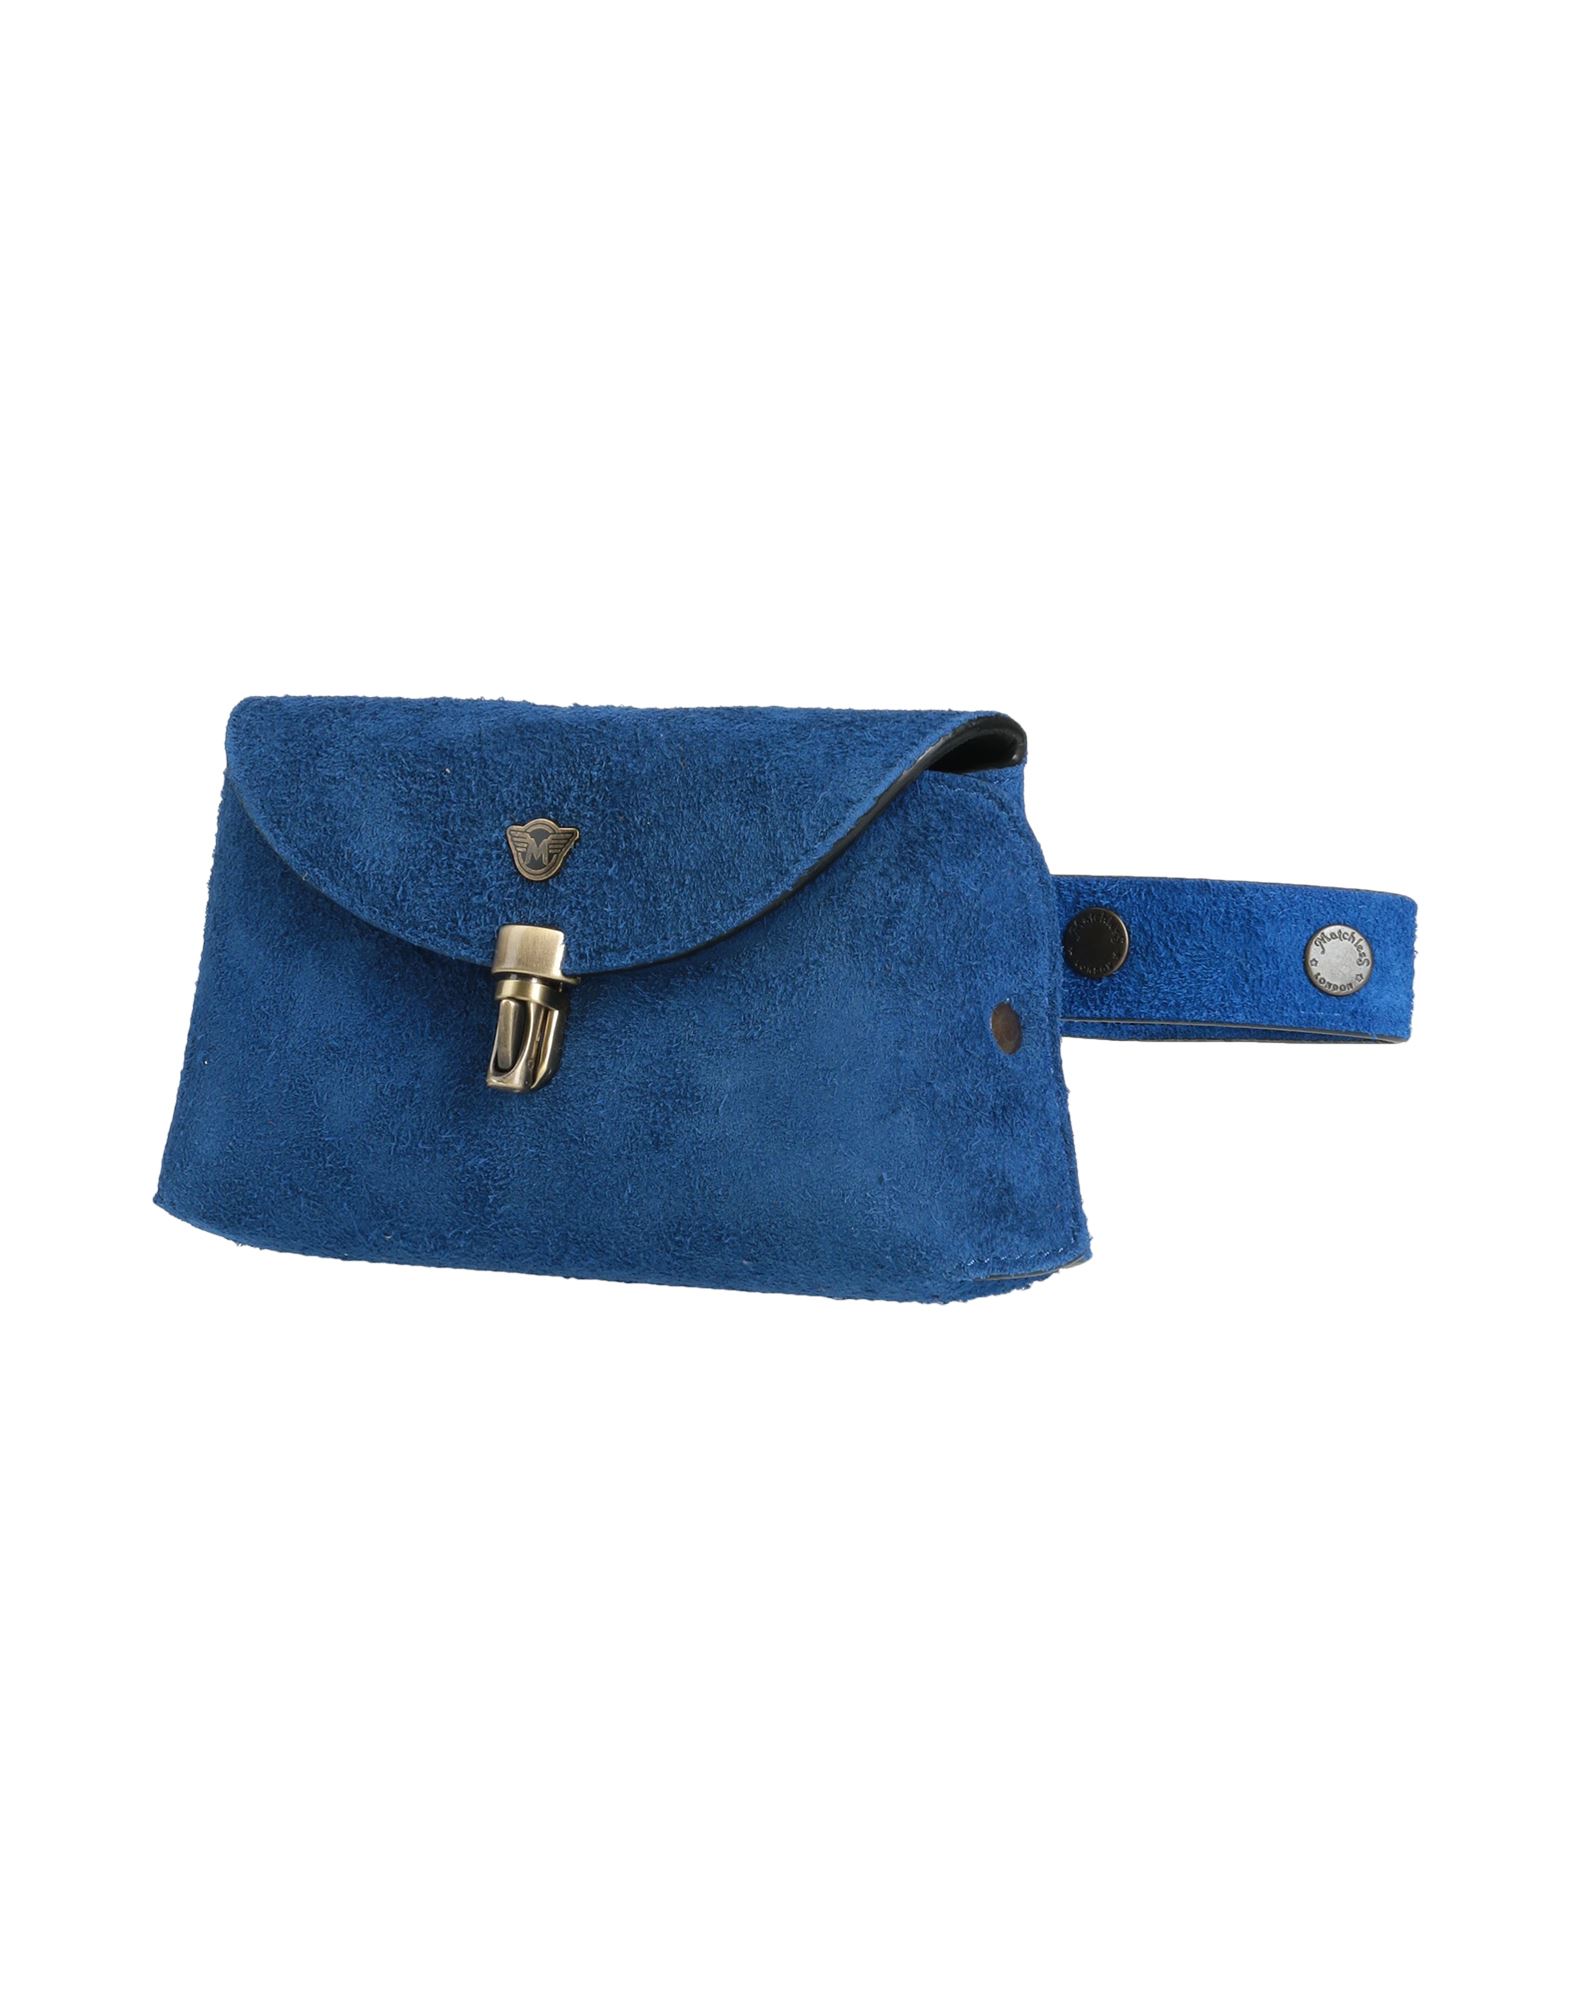 Matchless Bum Bags In Blue